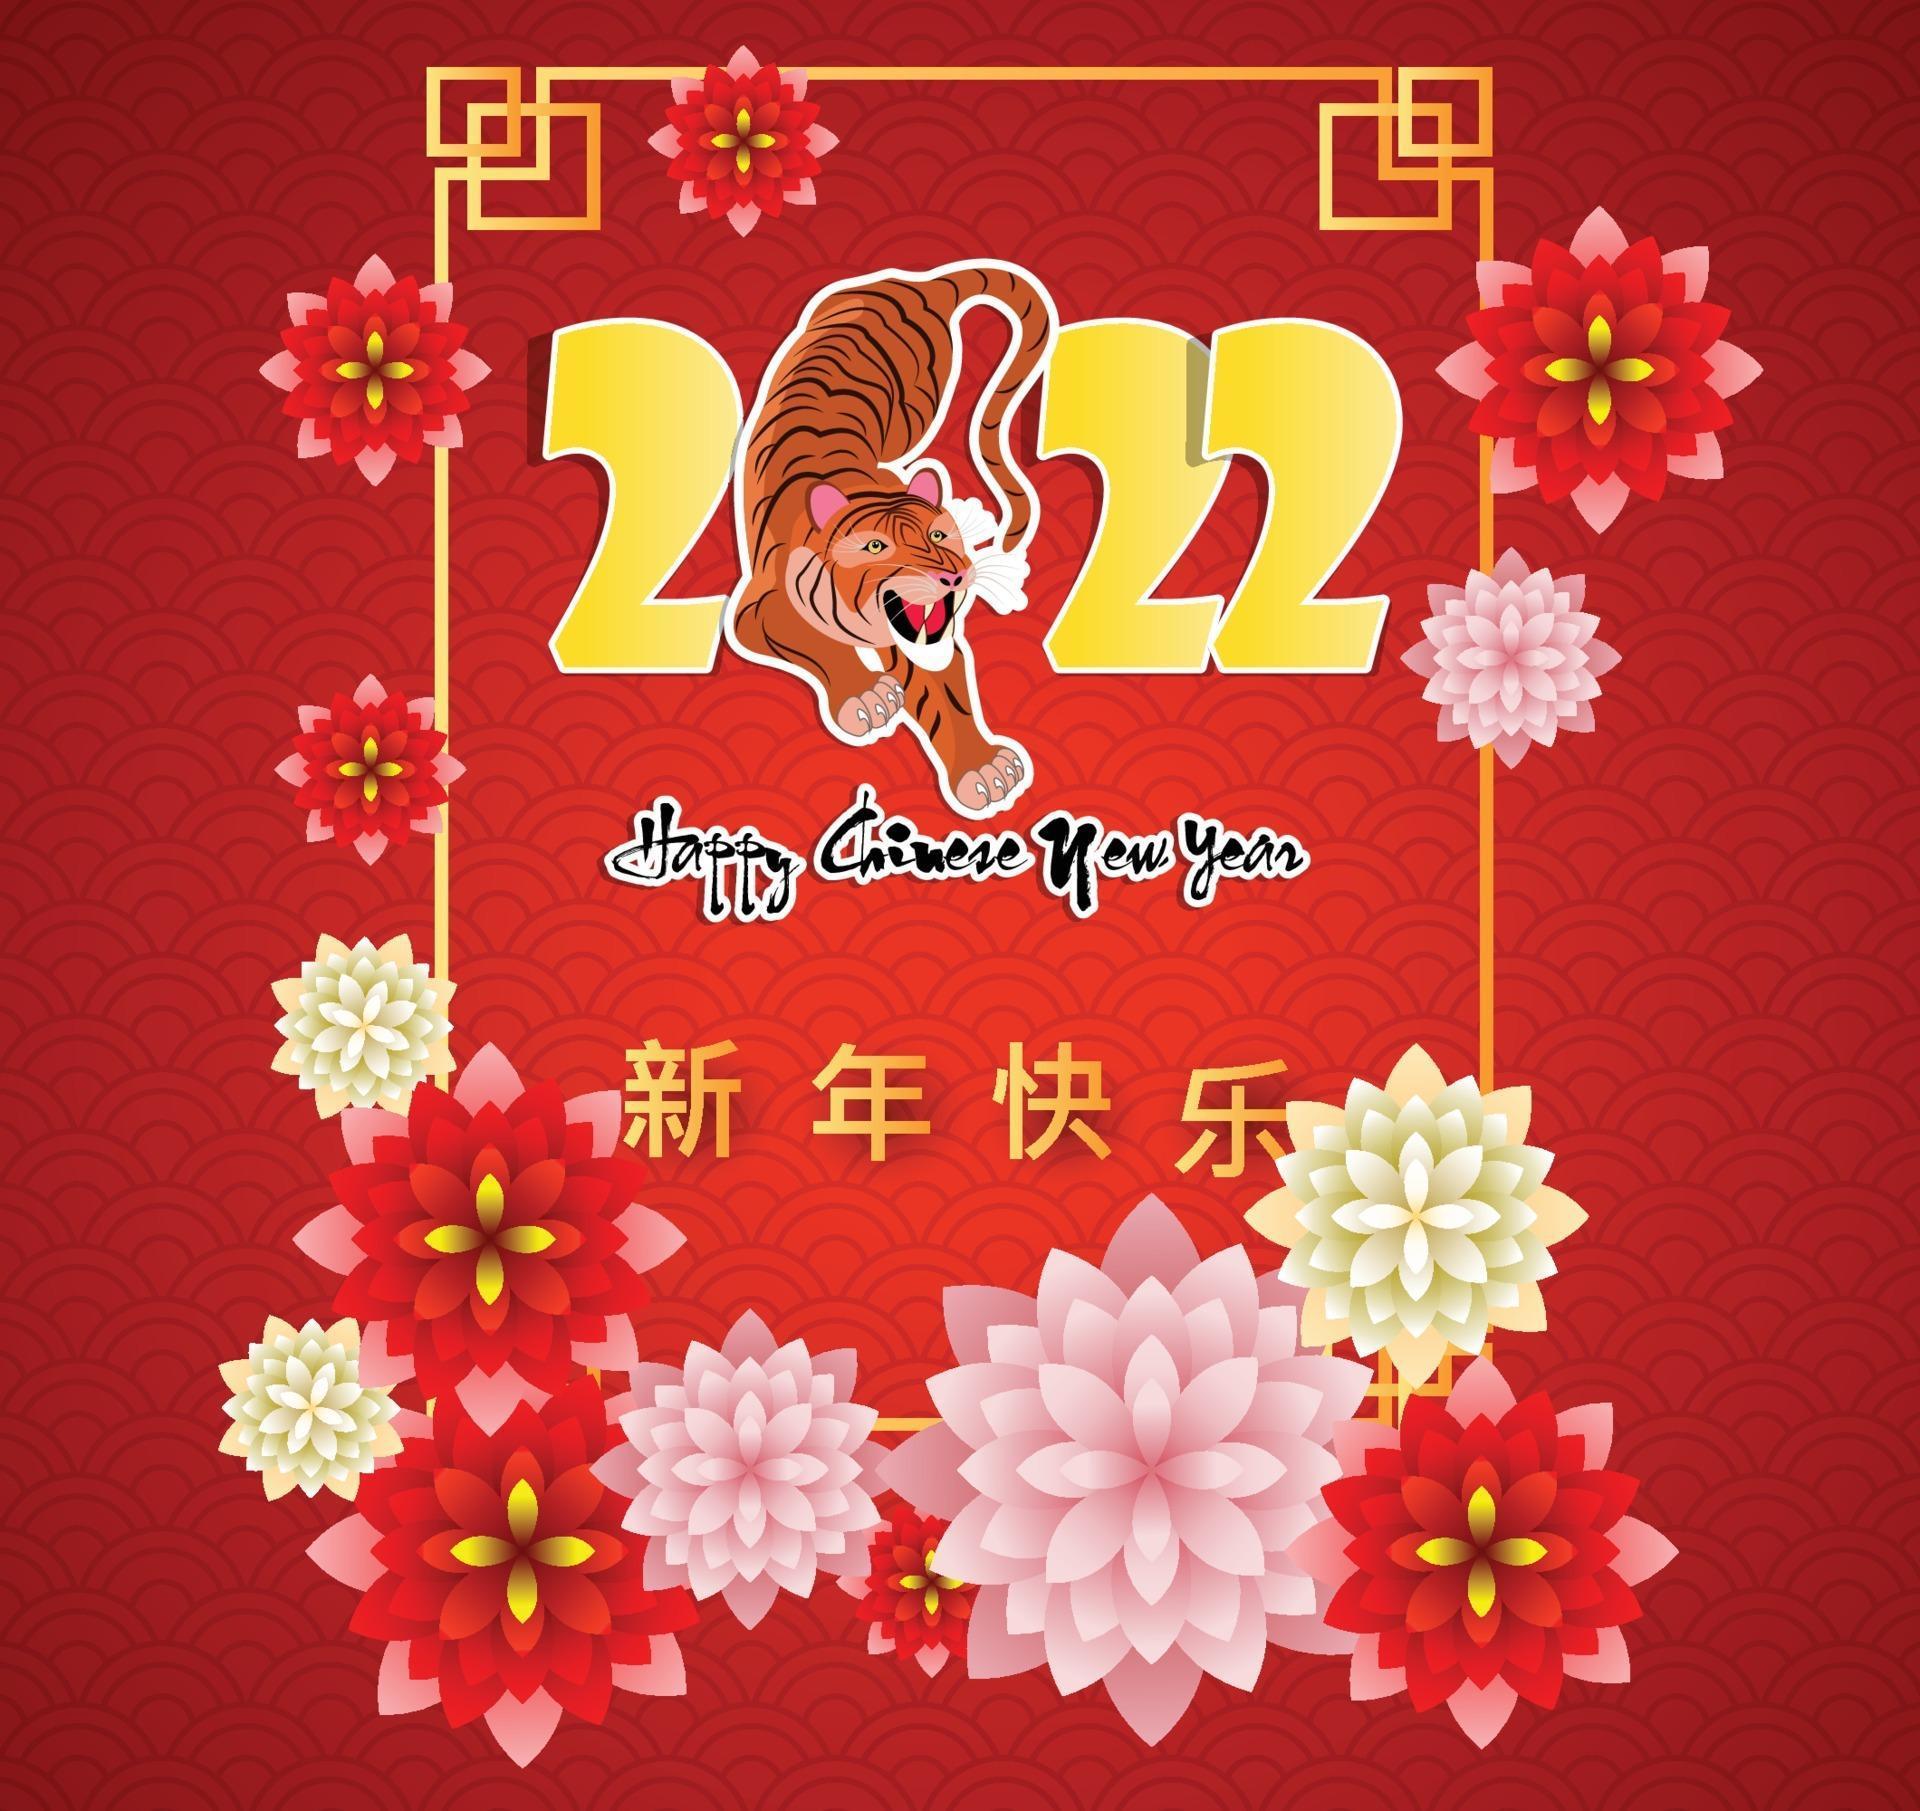 Happy Chinese new year 2022 year of the Tiger. Lunar New Year banner